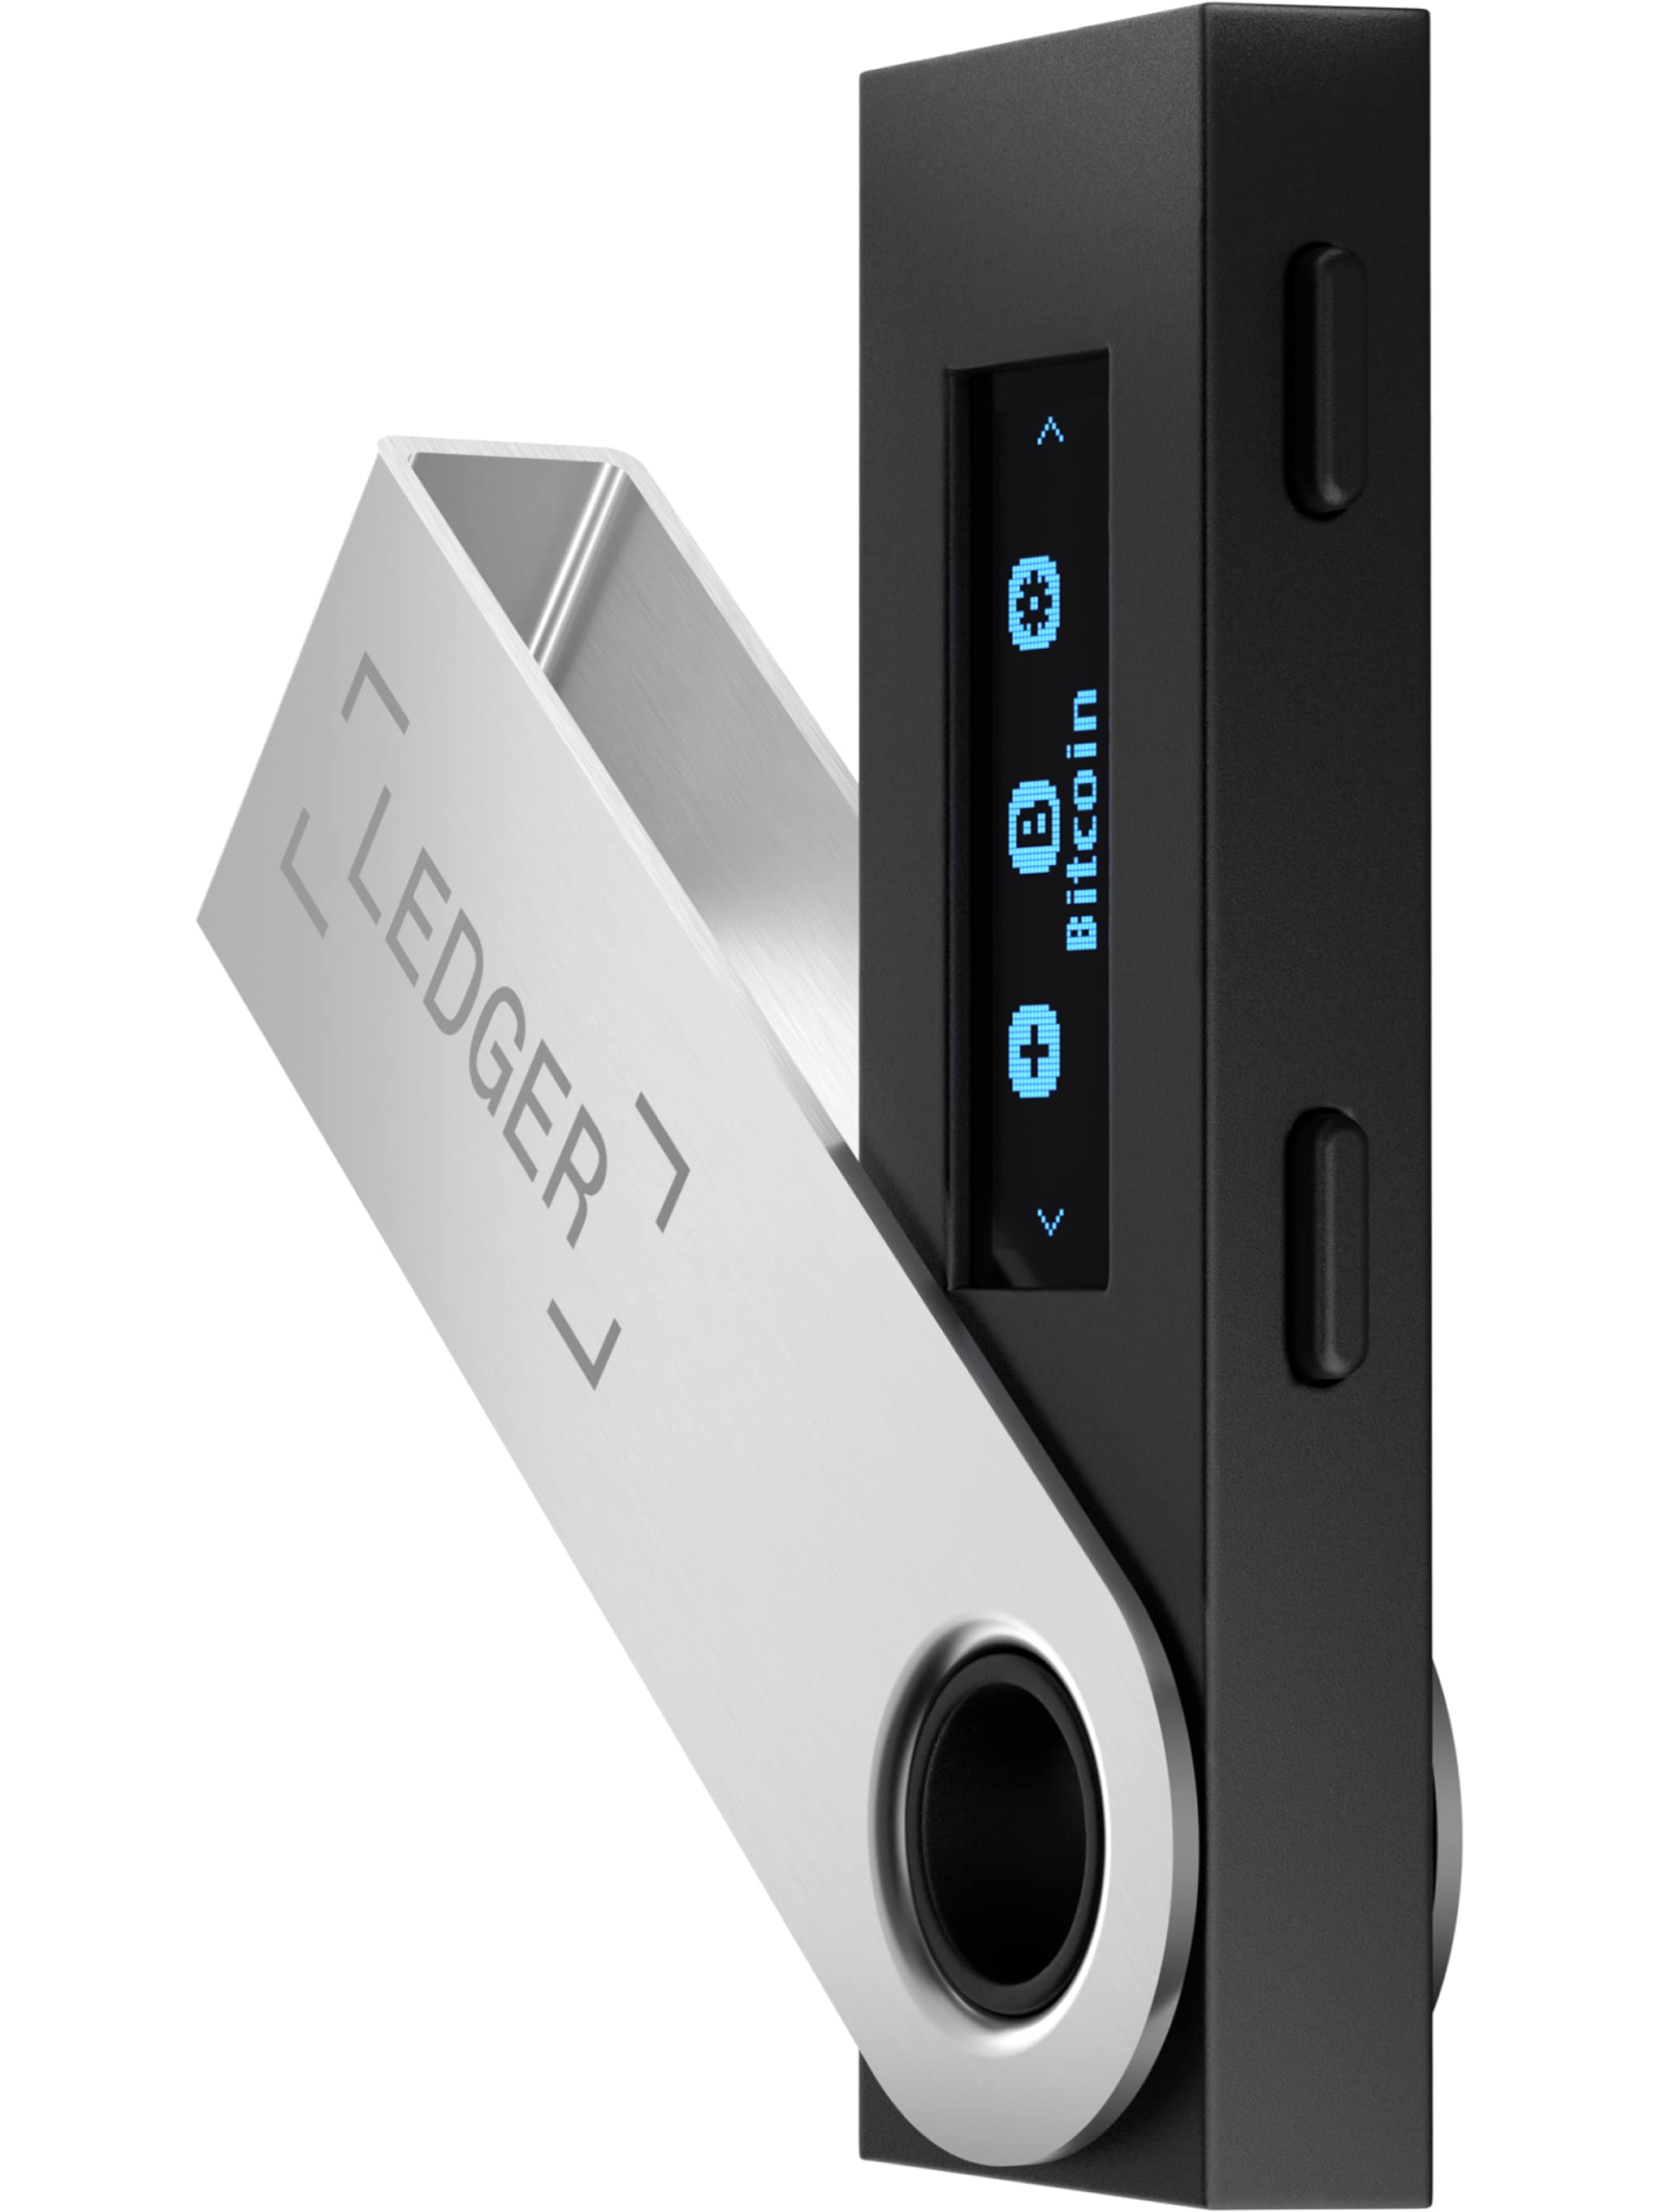 Ledger's Security Model: How Are Ledger Devices Secured?